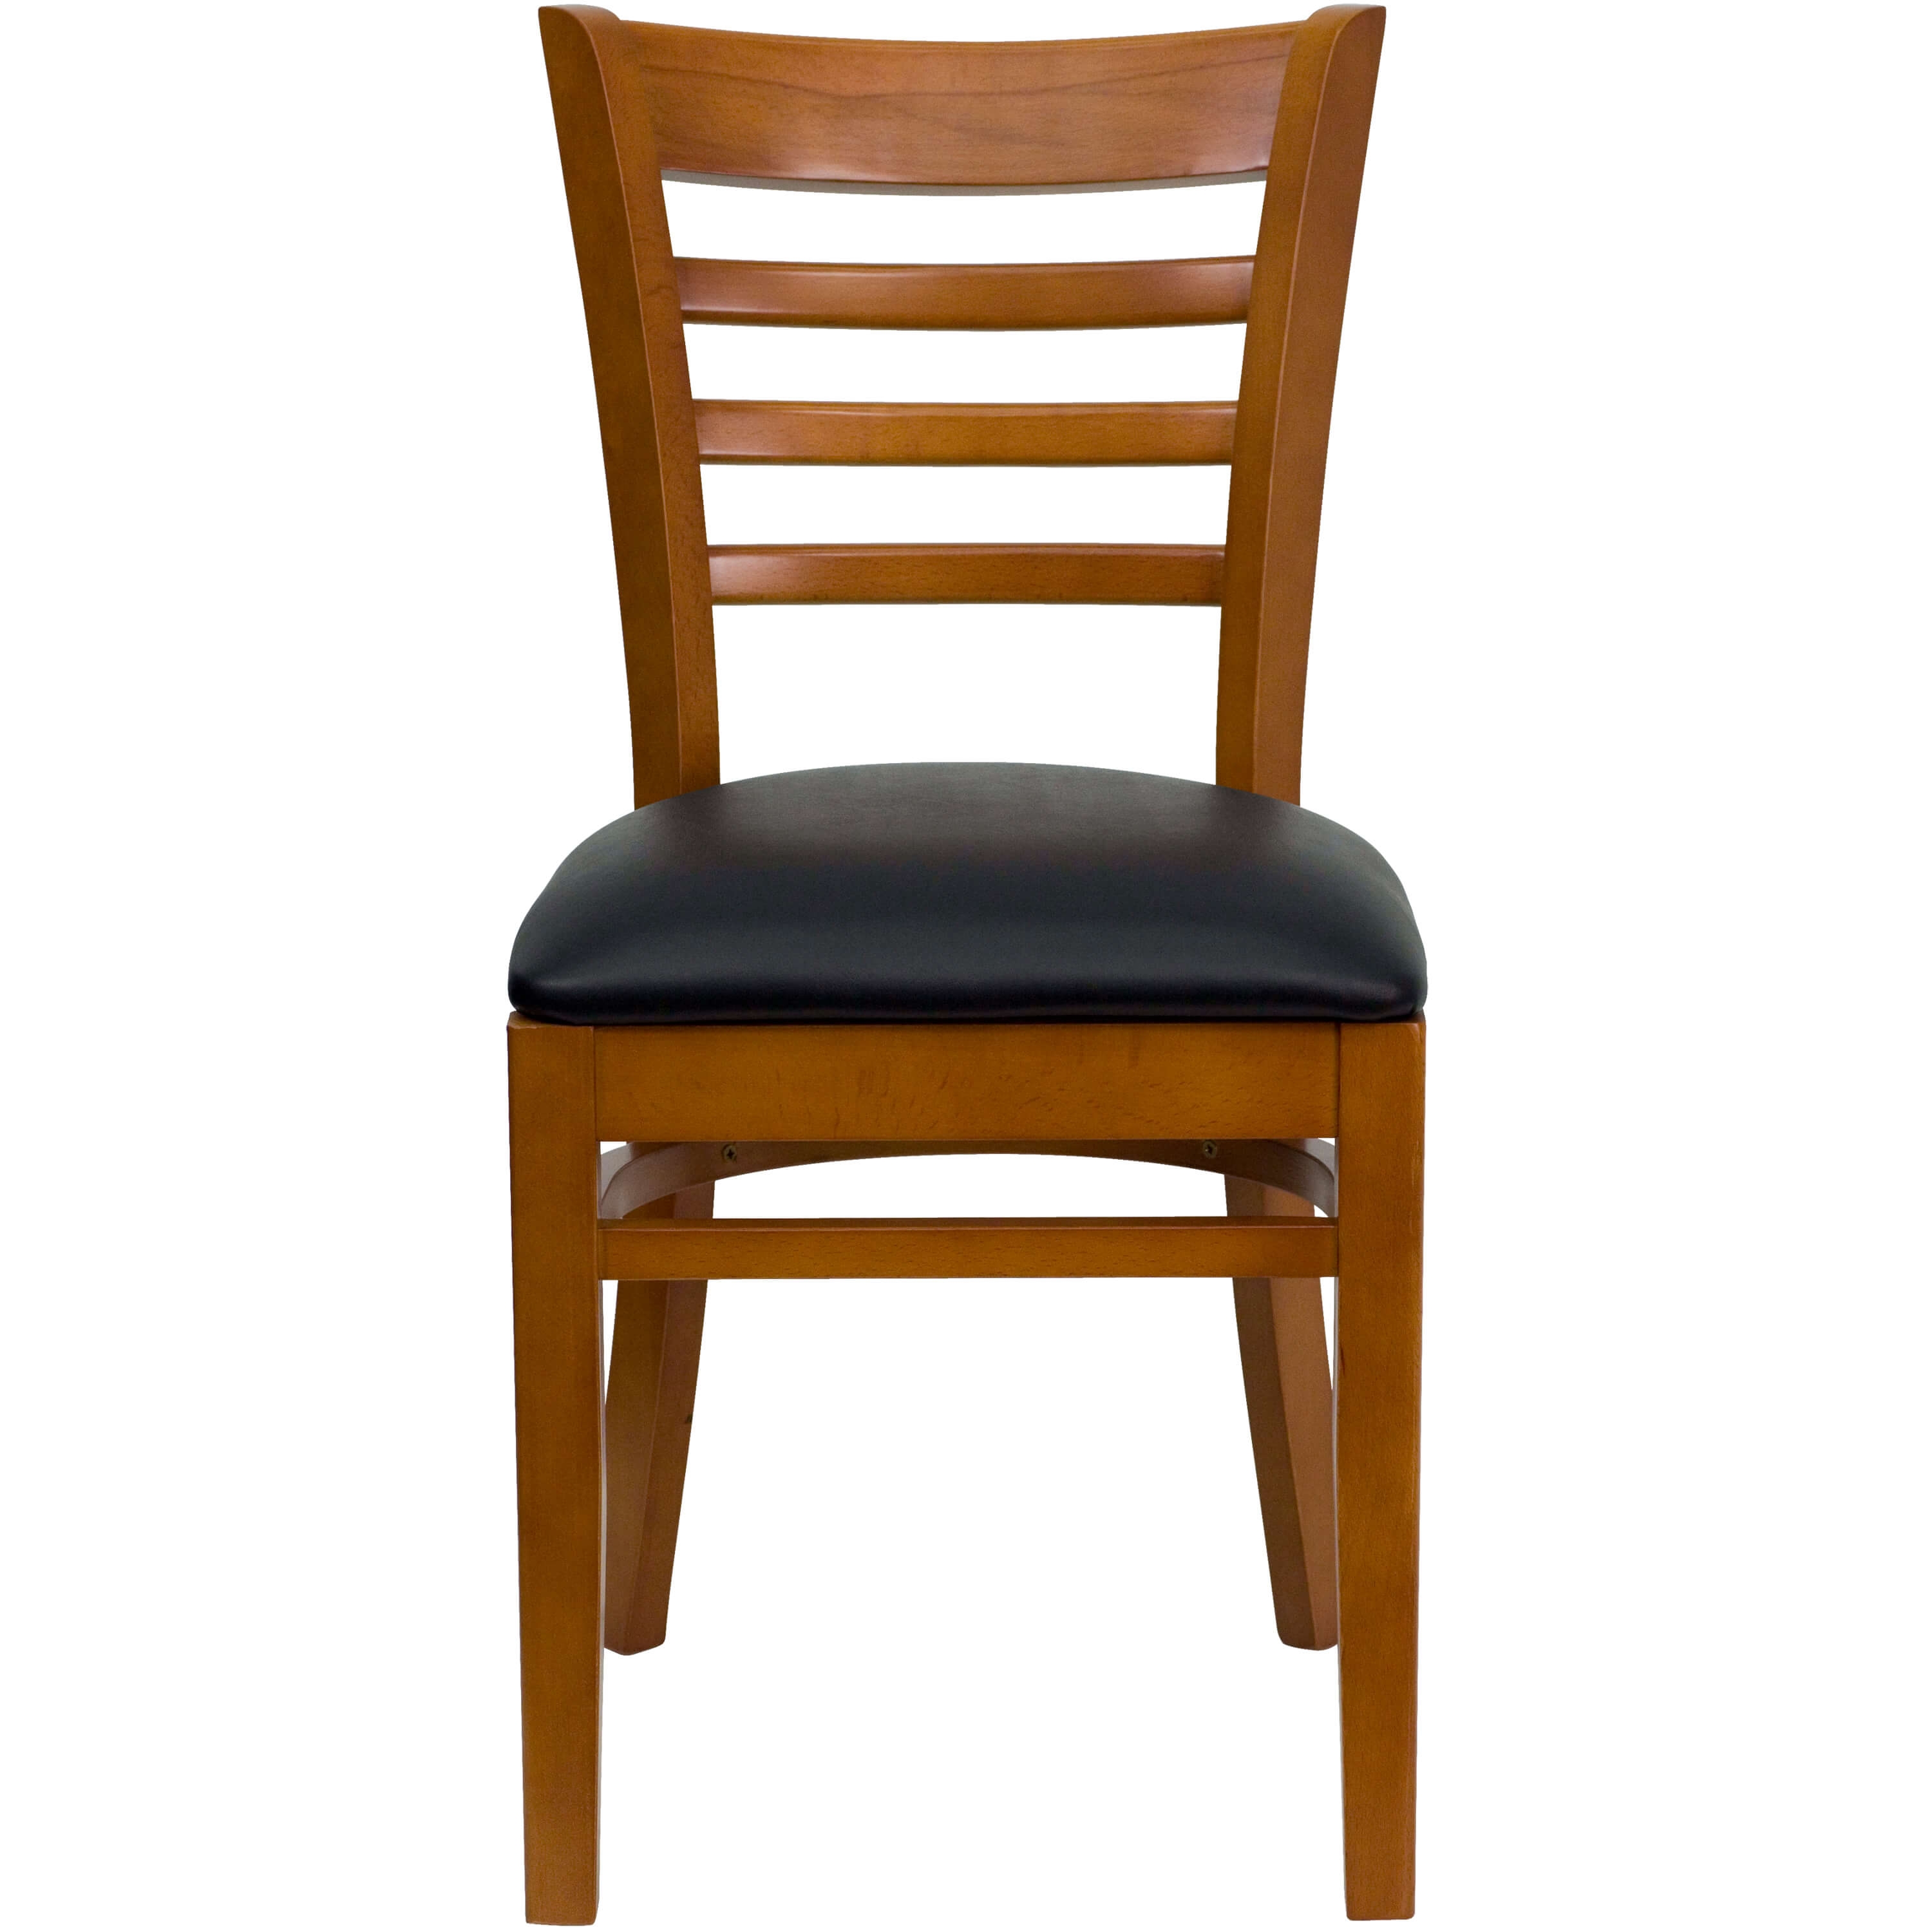 Ladder back wooden dining chair front view